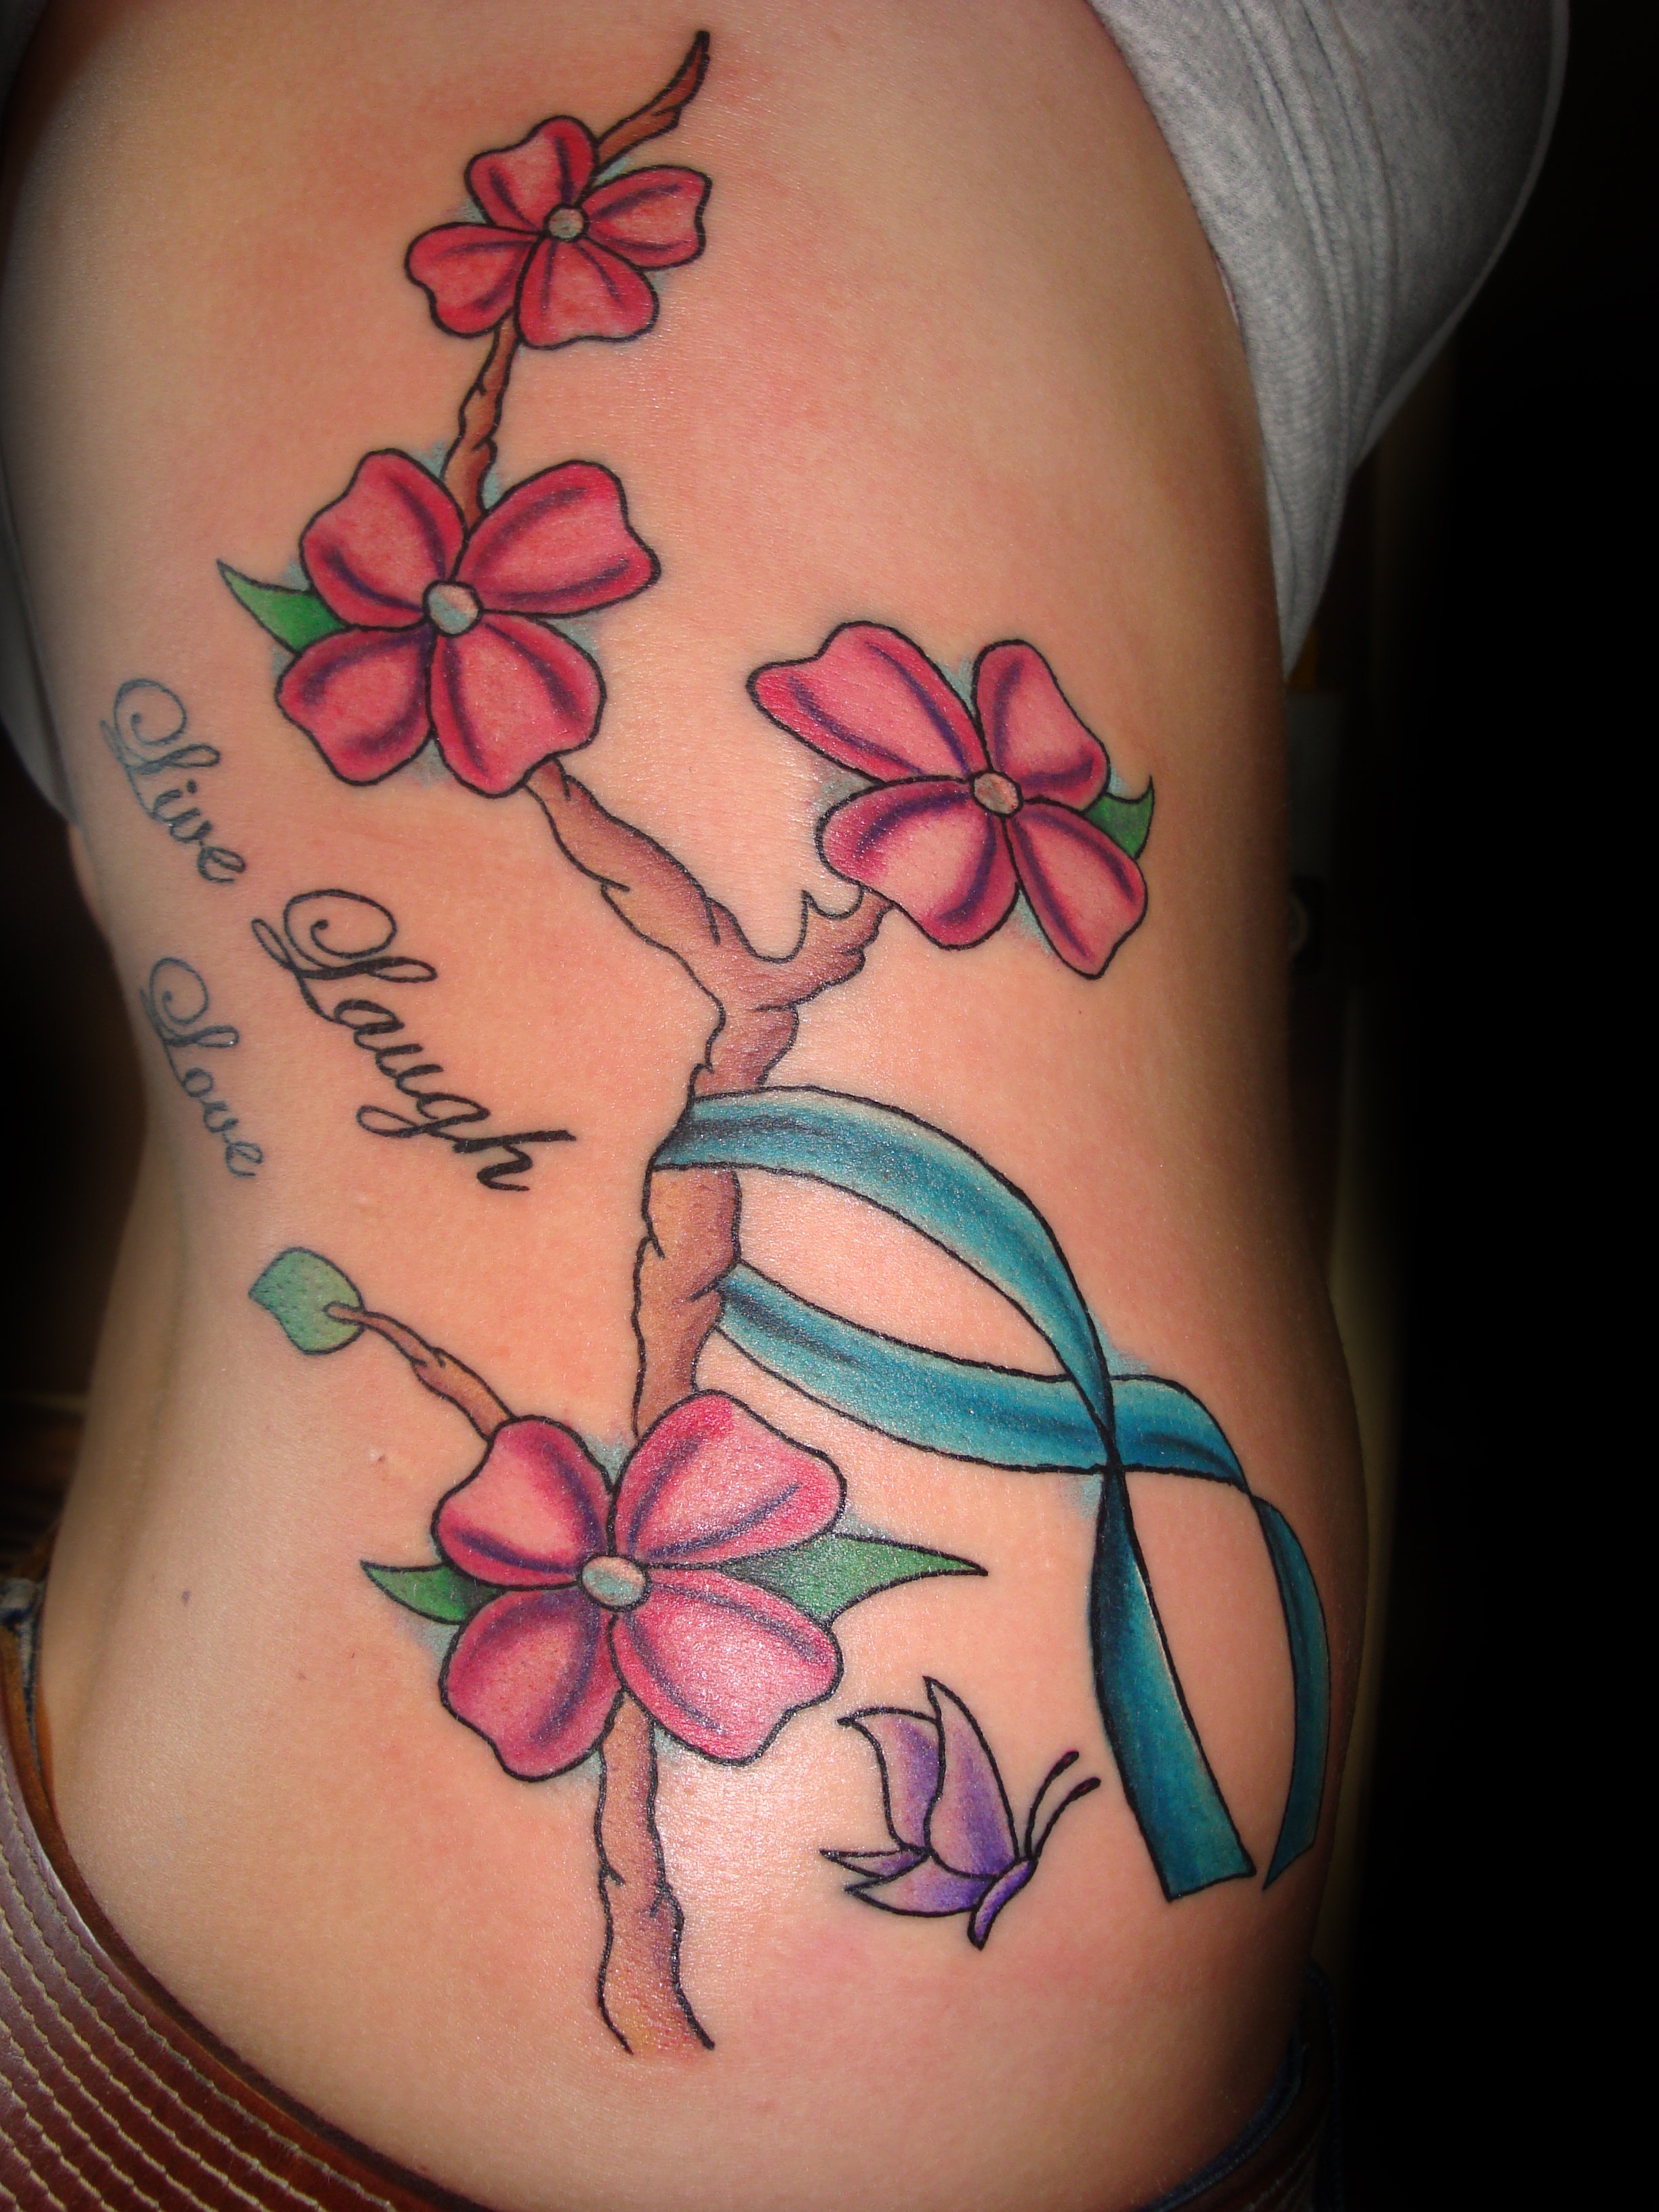 Cancer Ribbon Tattoos with Flowers